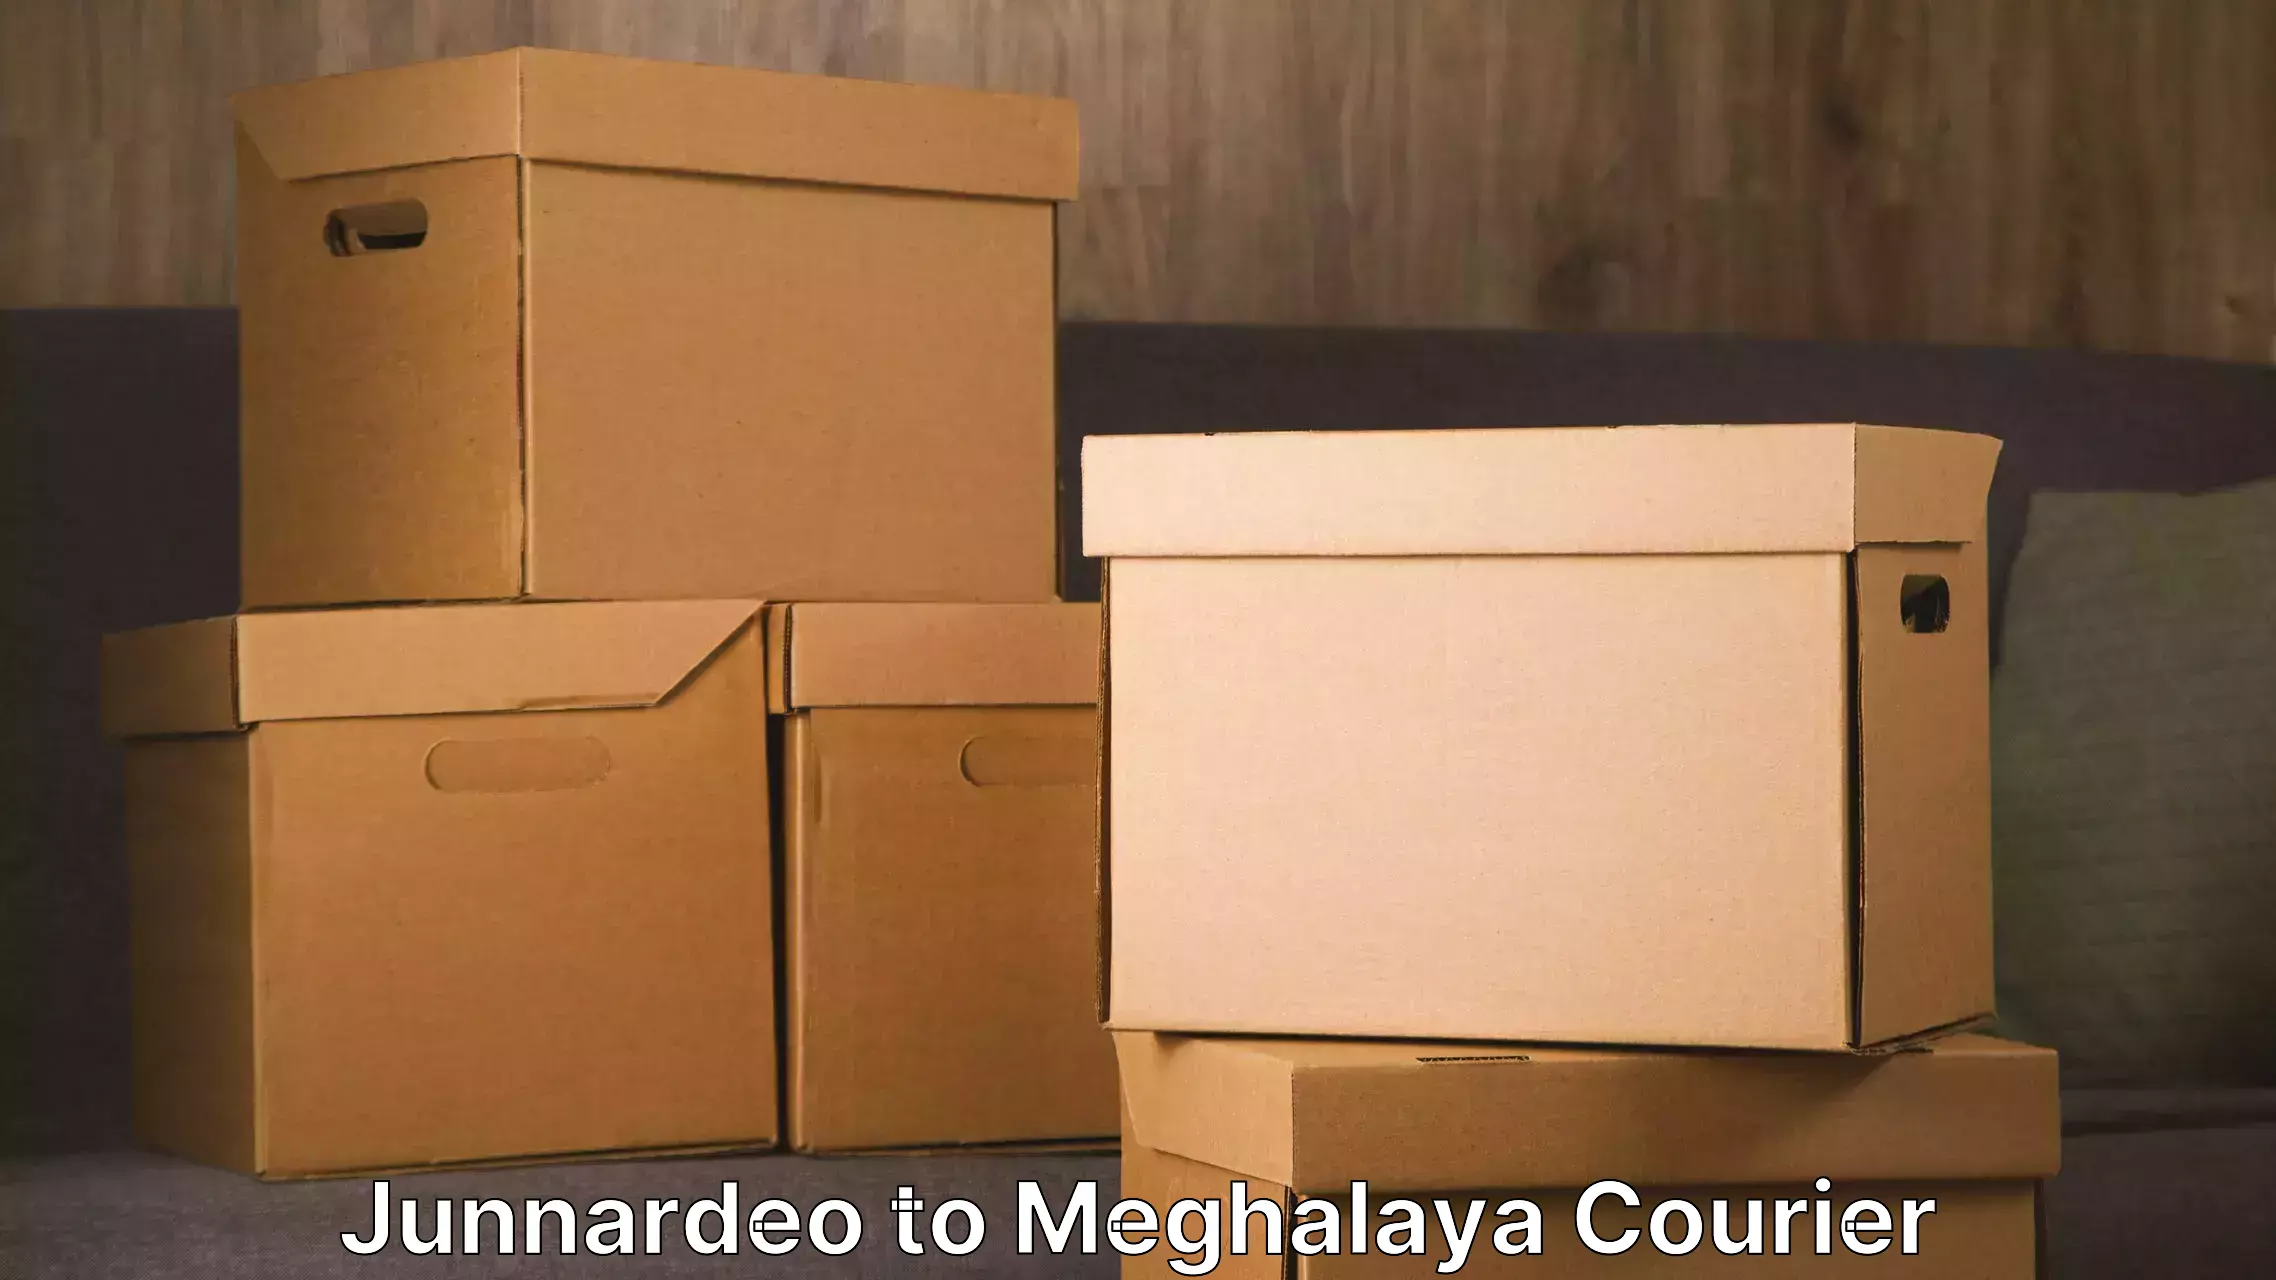 Trusted moving company Junnardeo to Shillong